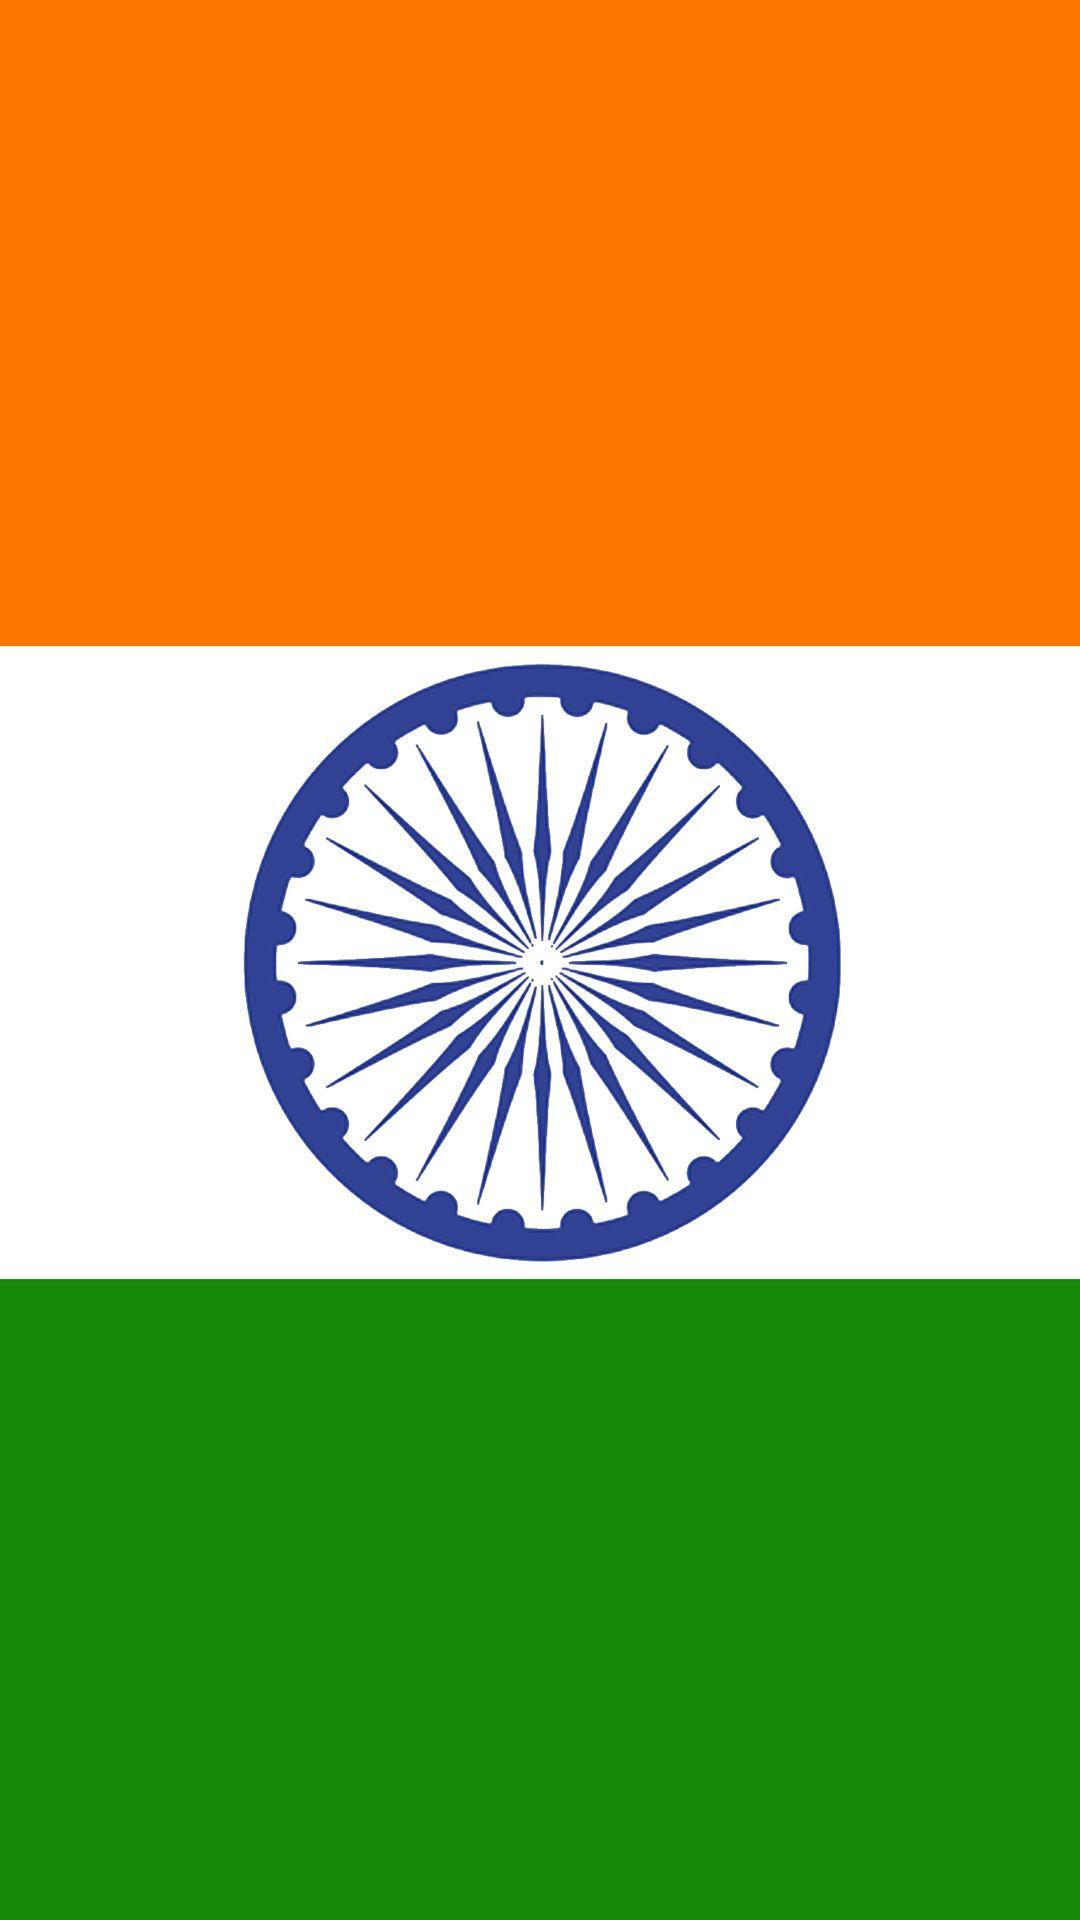 India Flag for Mobile Phone Wallpaper 11 of 17 India